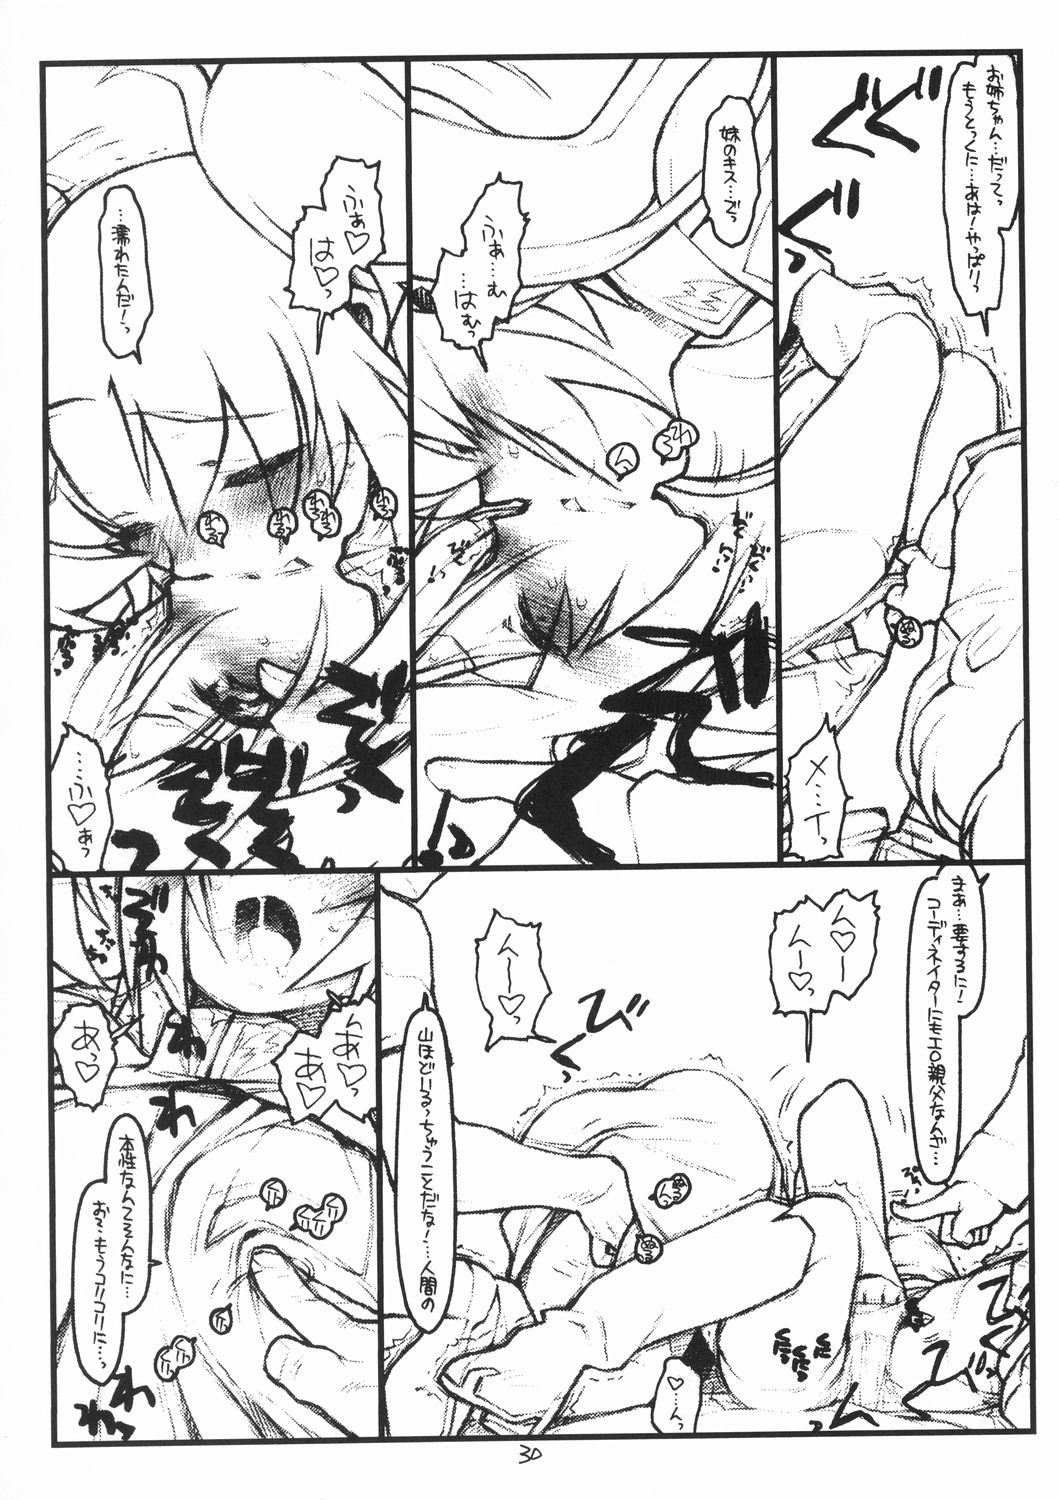 (SC28) [bolze. (rit.)] Miscoordination. (Mobile Suit Gundam SEED DESTINY) page 29 full